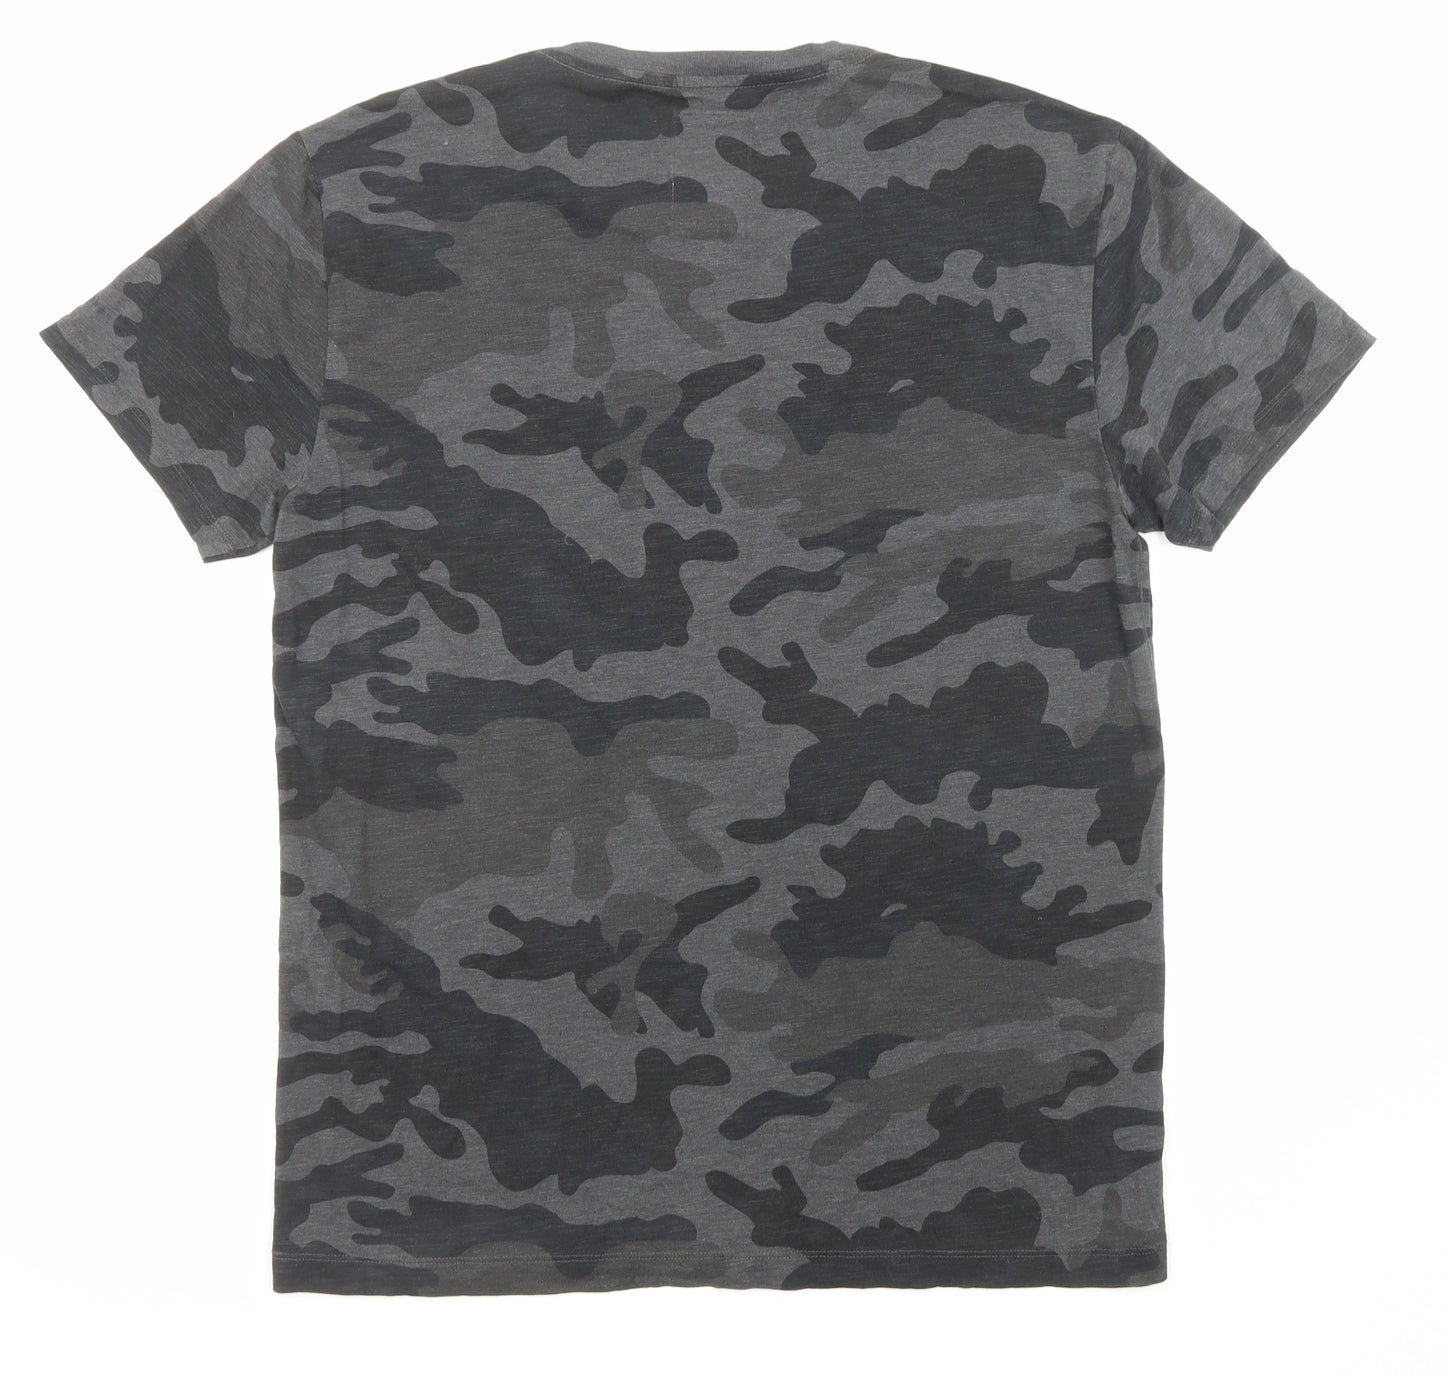 G-Star Mens Grey Camouflage Polyester T-Shirt Size XL Crew Neck